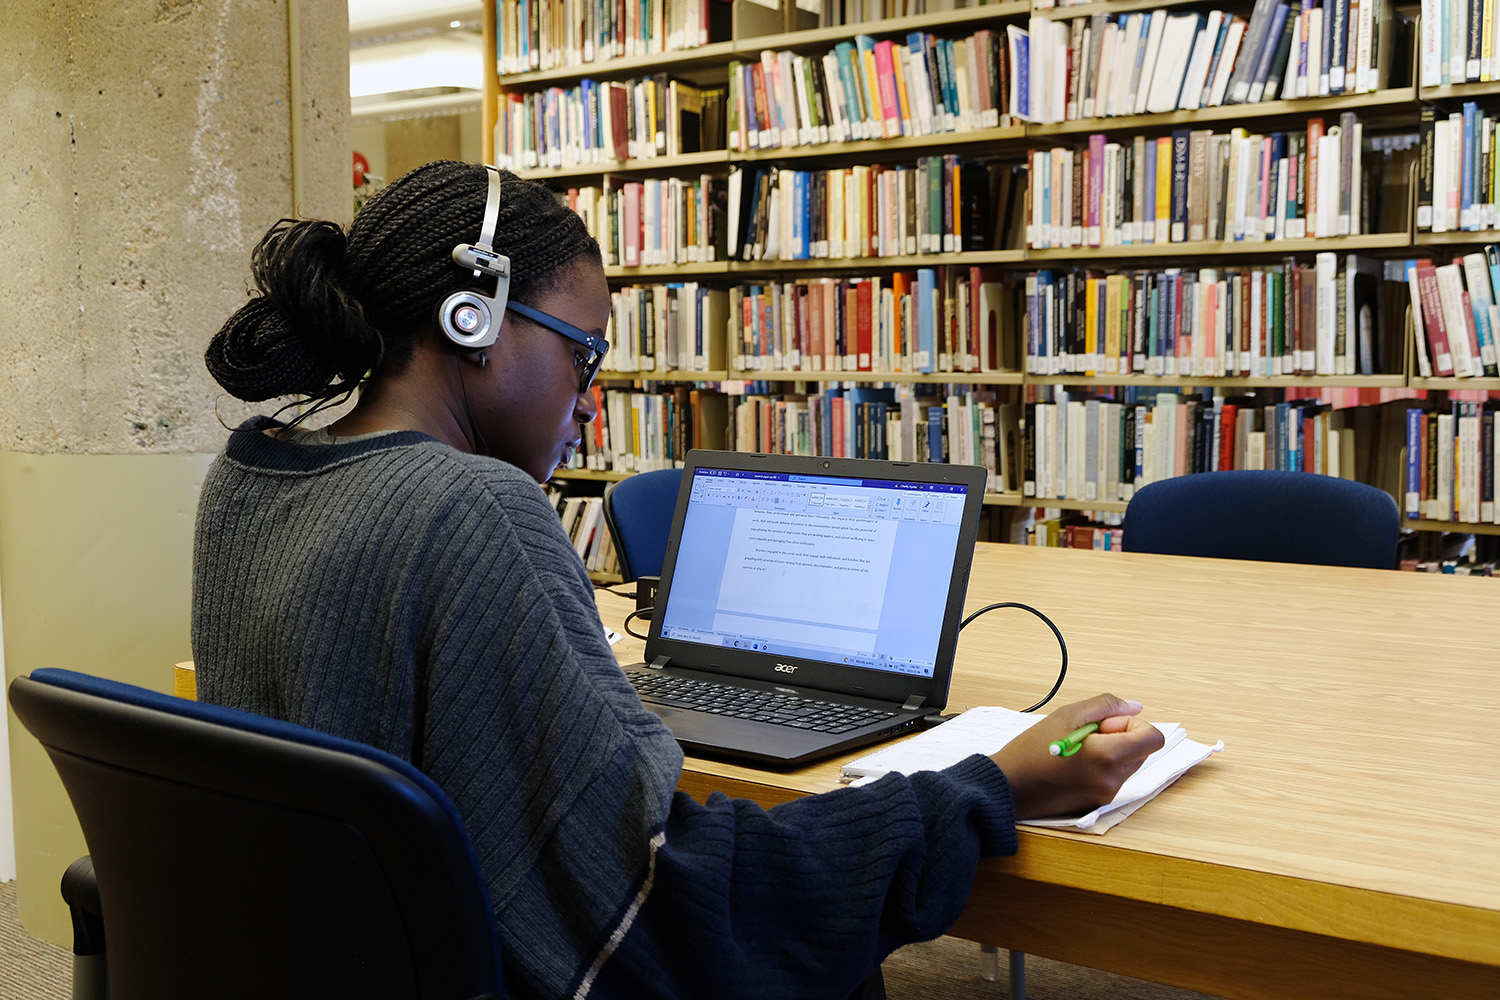 A female student wears headphones as she works in the library.